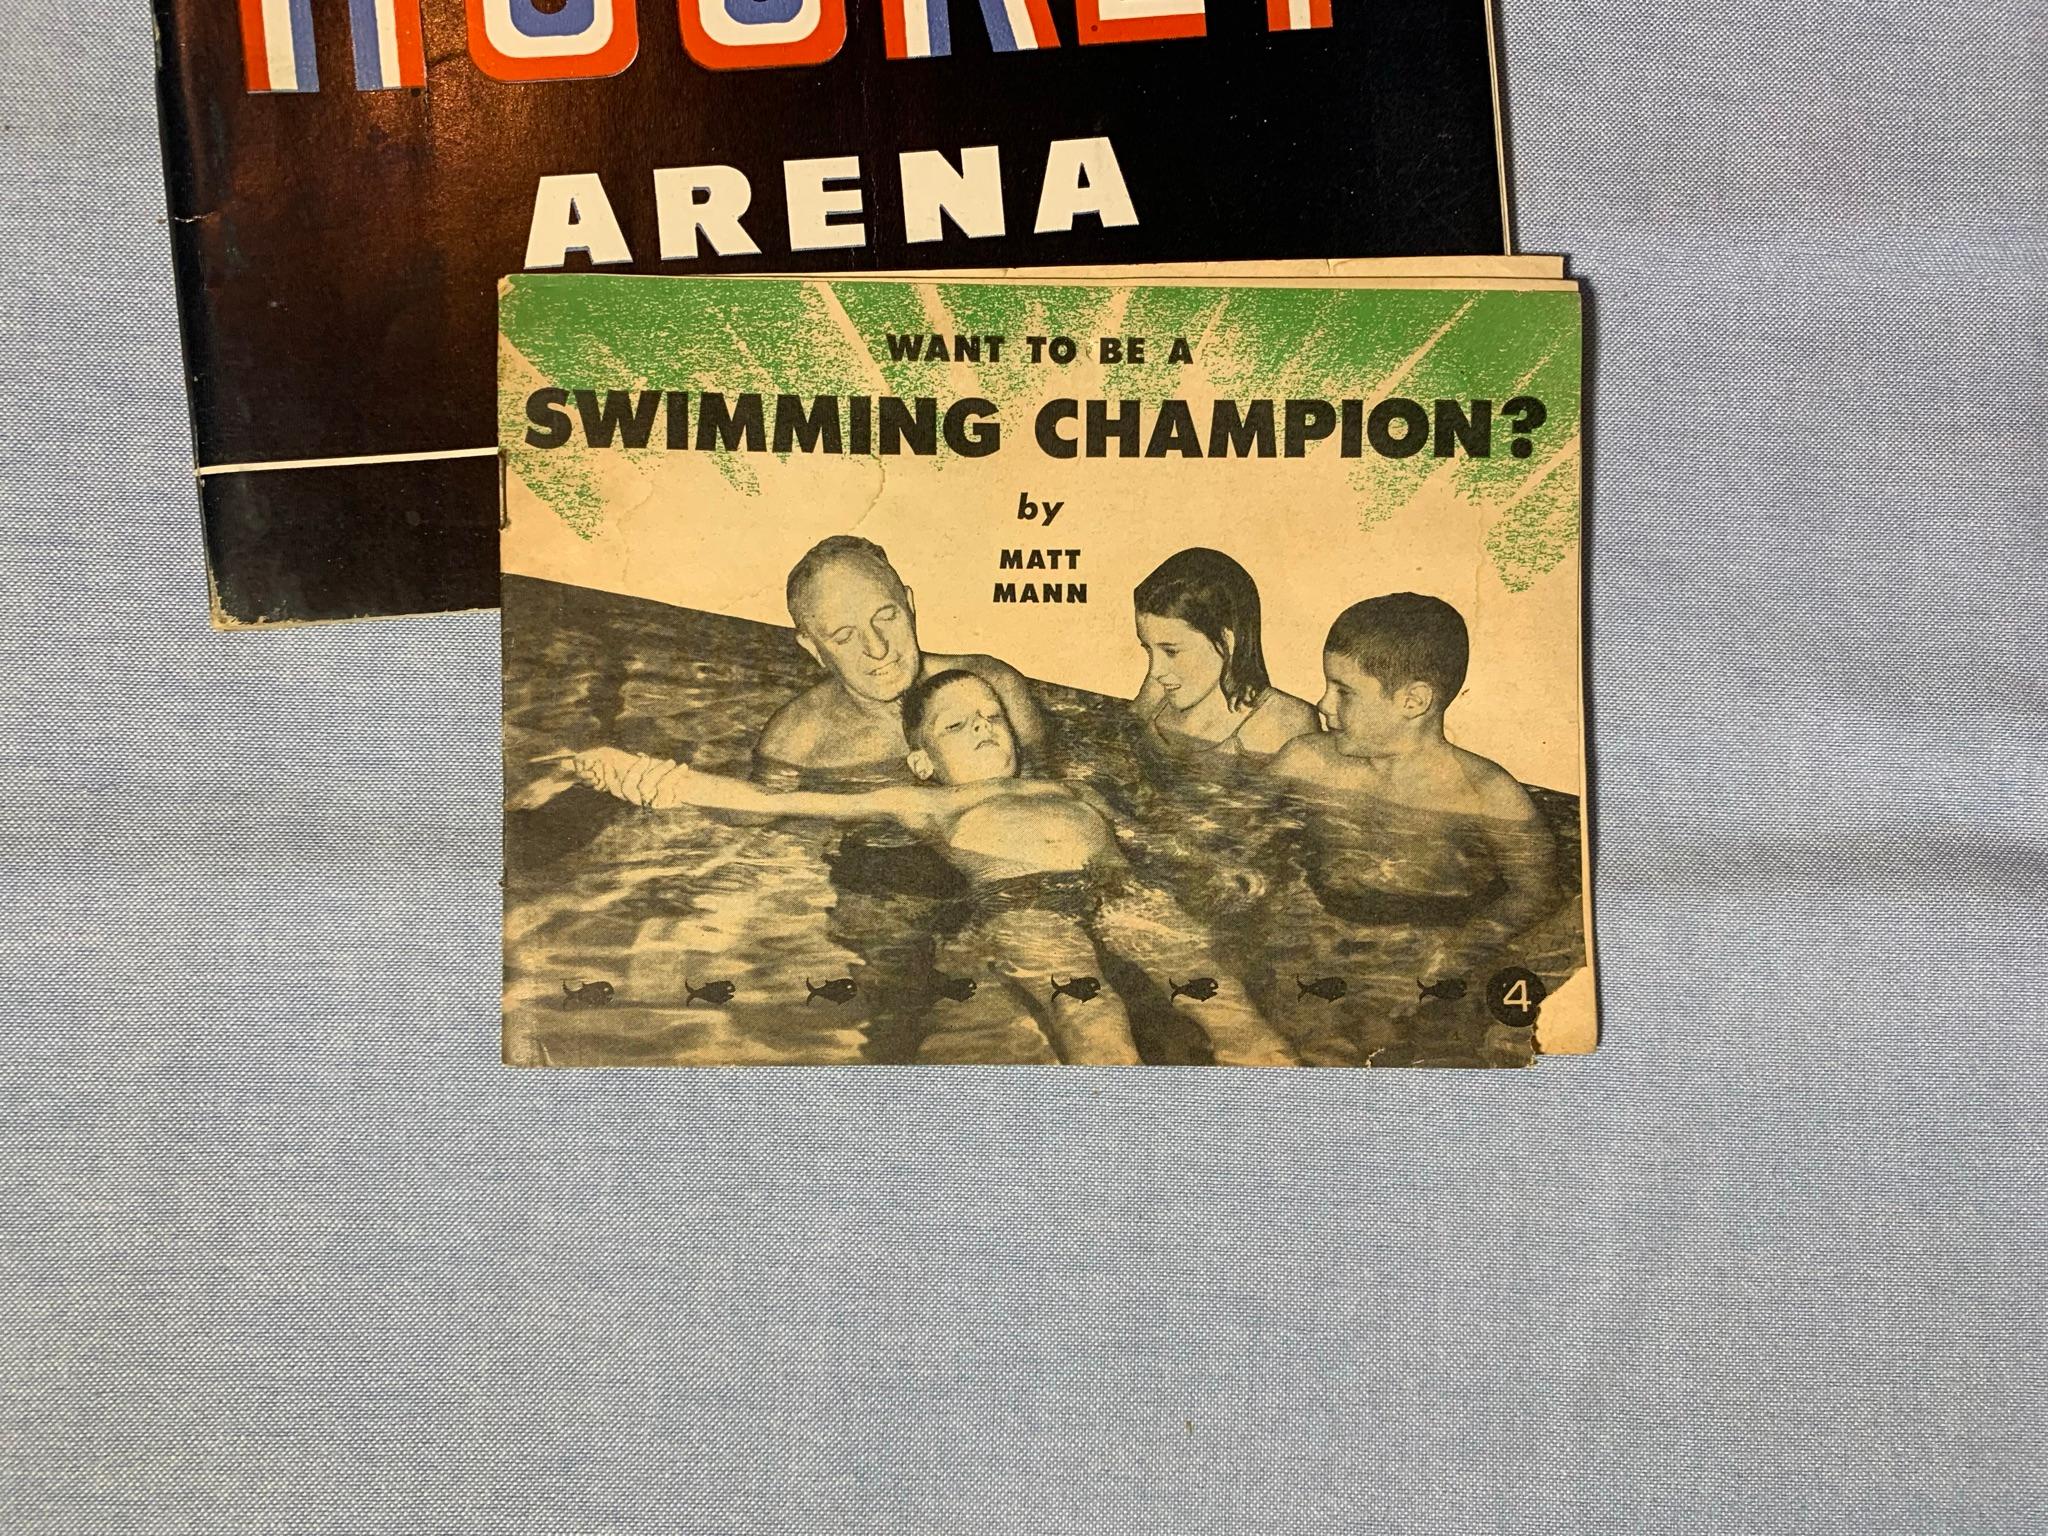 1950 Sport Annual Magazine, "Want to be a Swimming Champion?" by Matt Mann